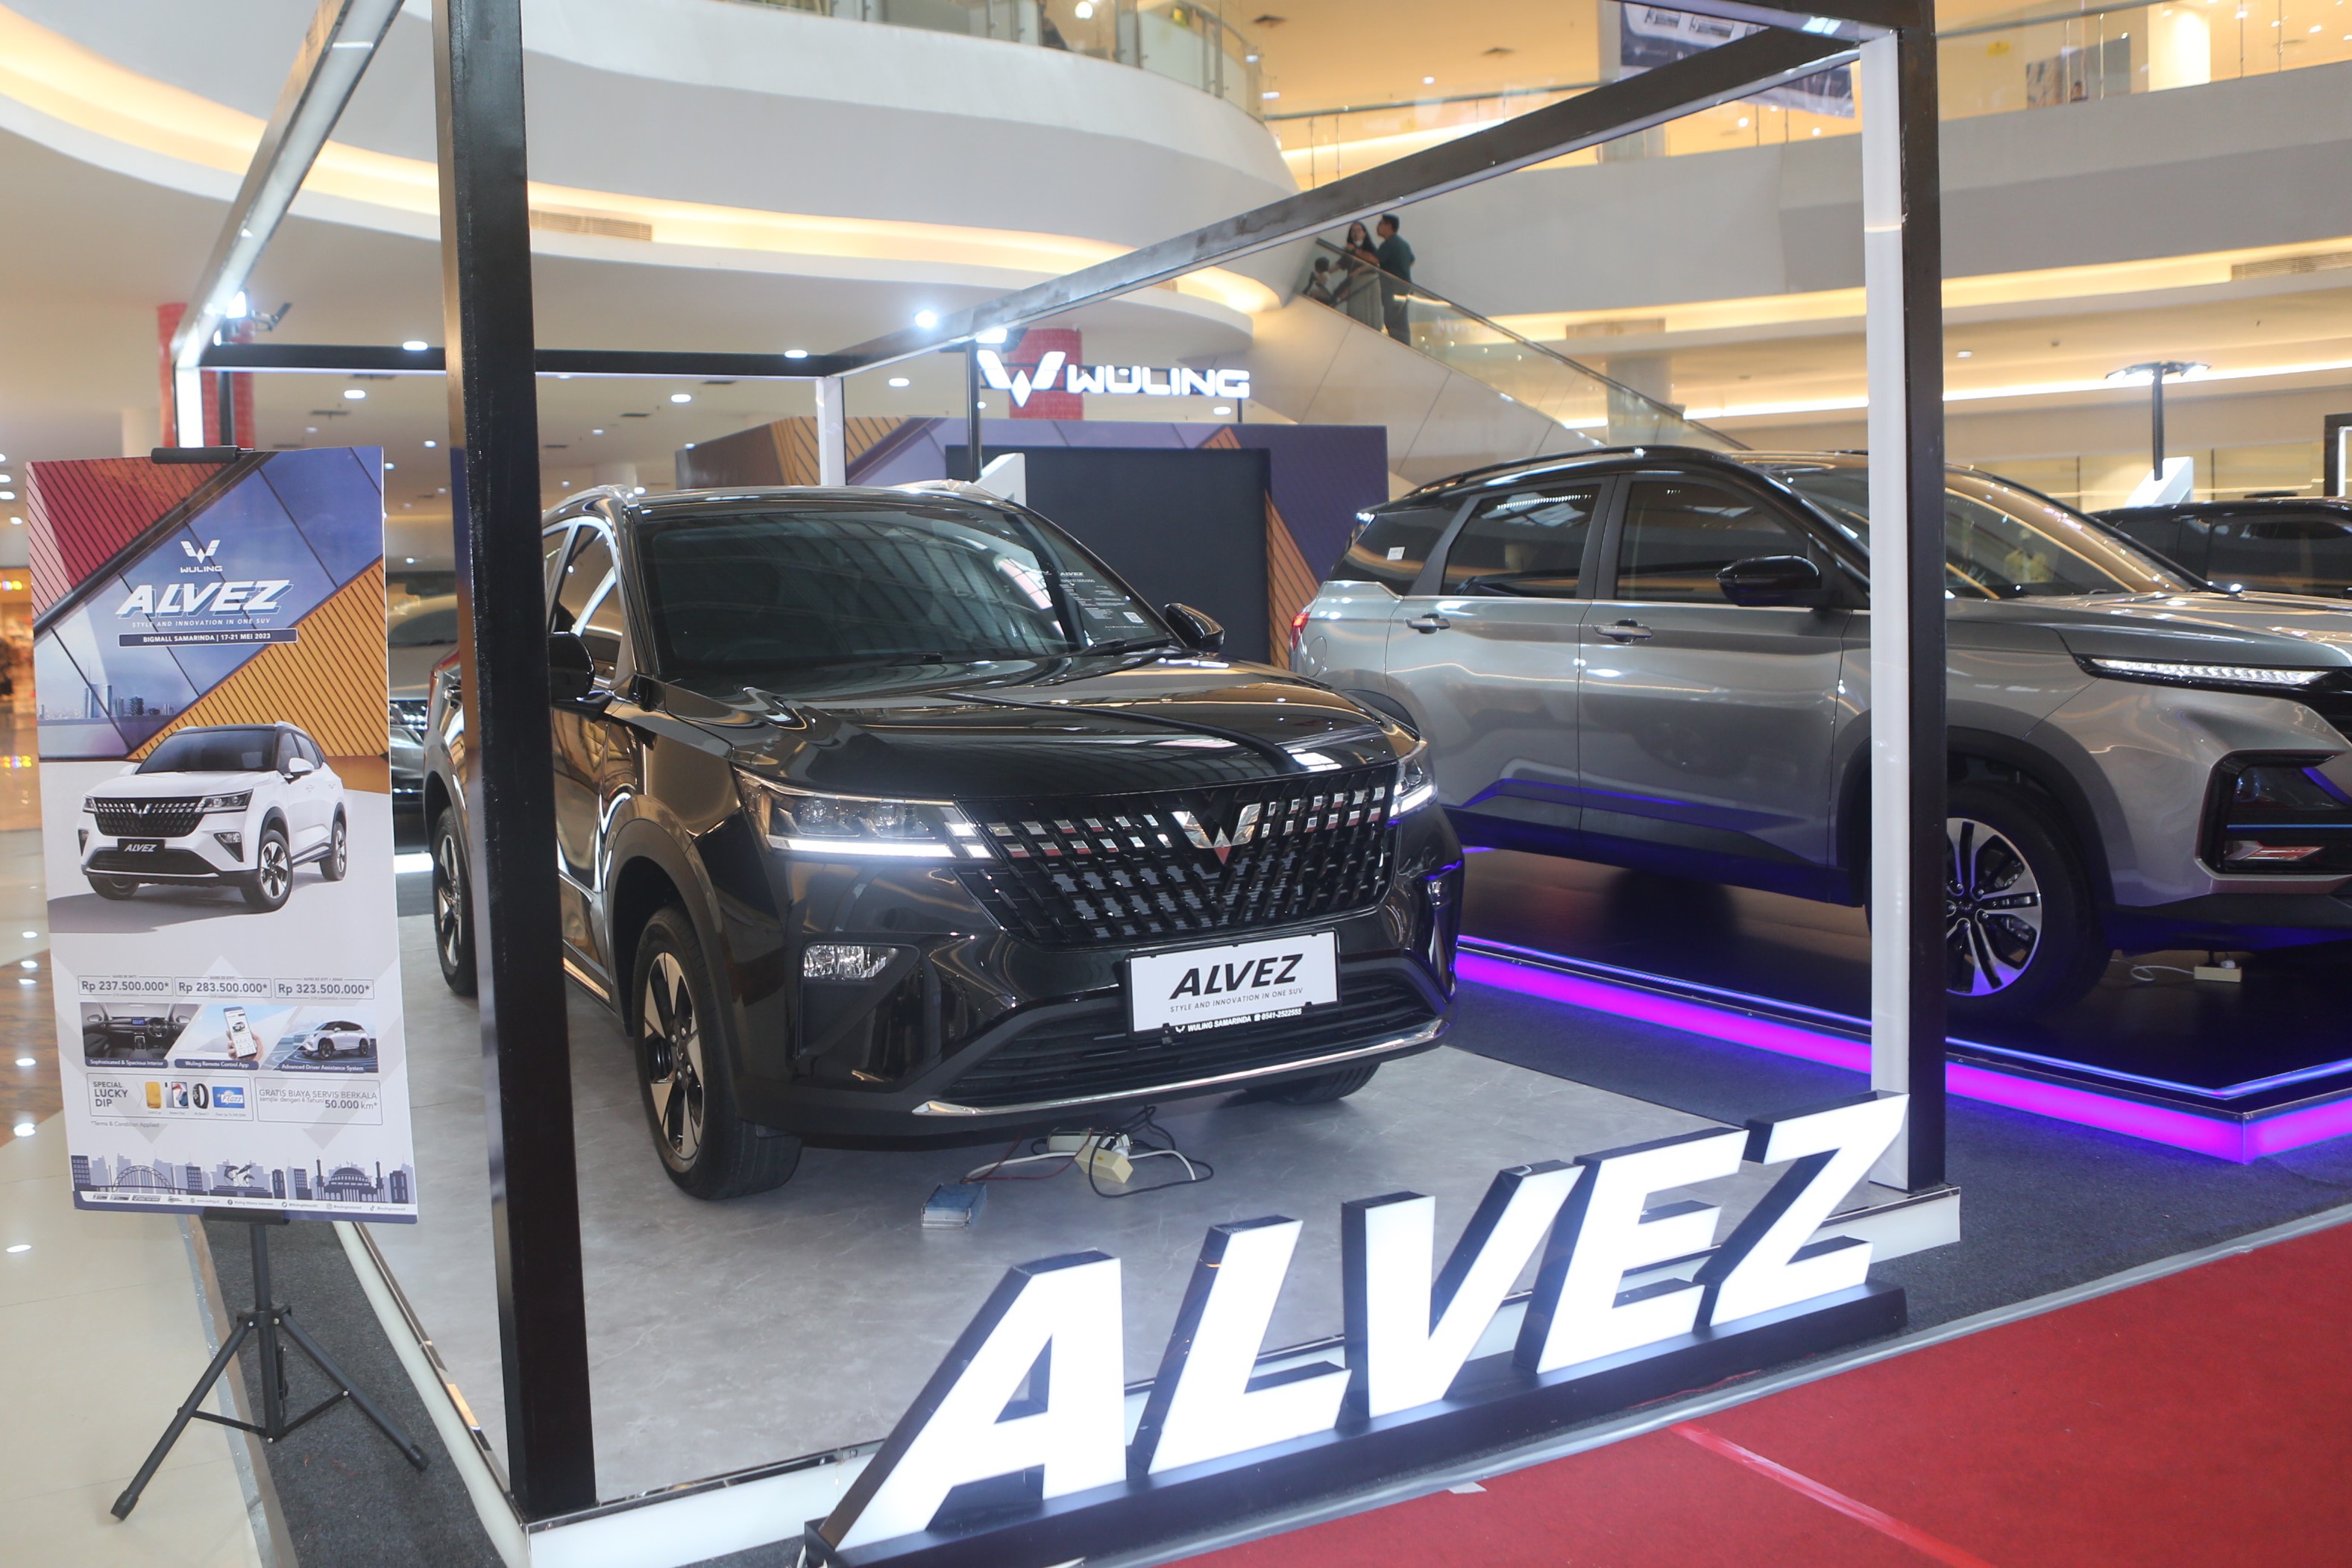 Image Wuling Alvez ‘Style and Innovation in One SUV’ Officially Marketed in Samarinda